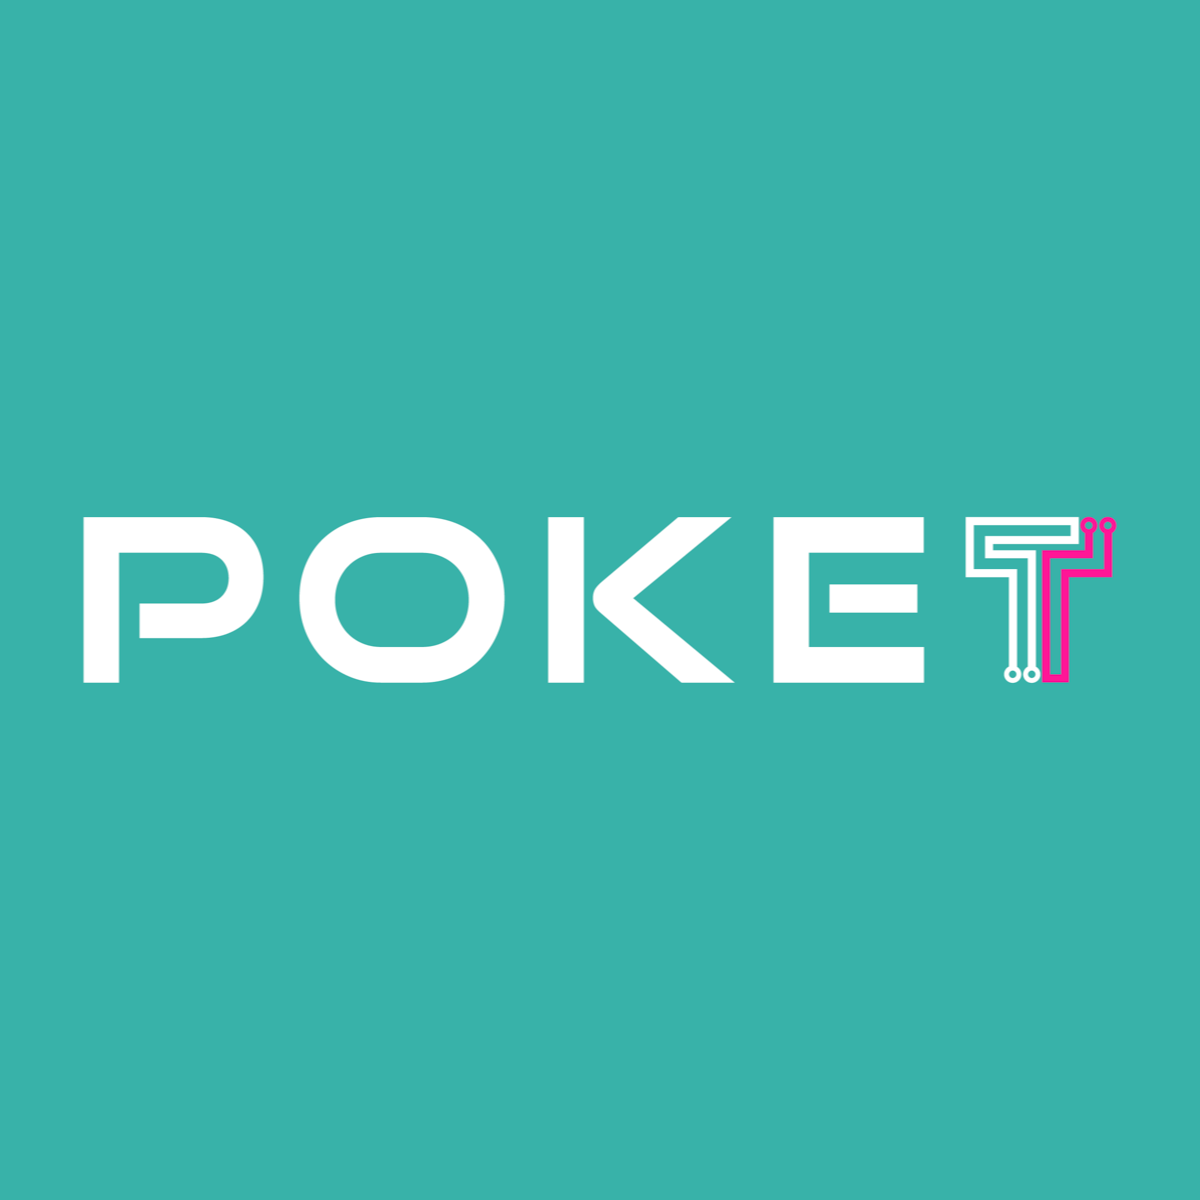 Hire Shopify Experts to integrate Poket Loyalty Rewards app into a Shopify store